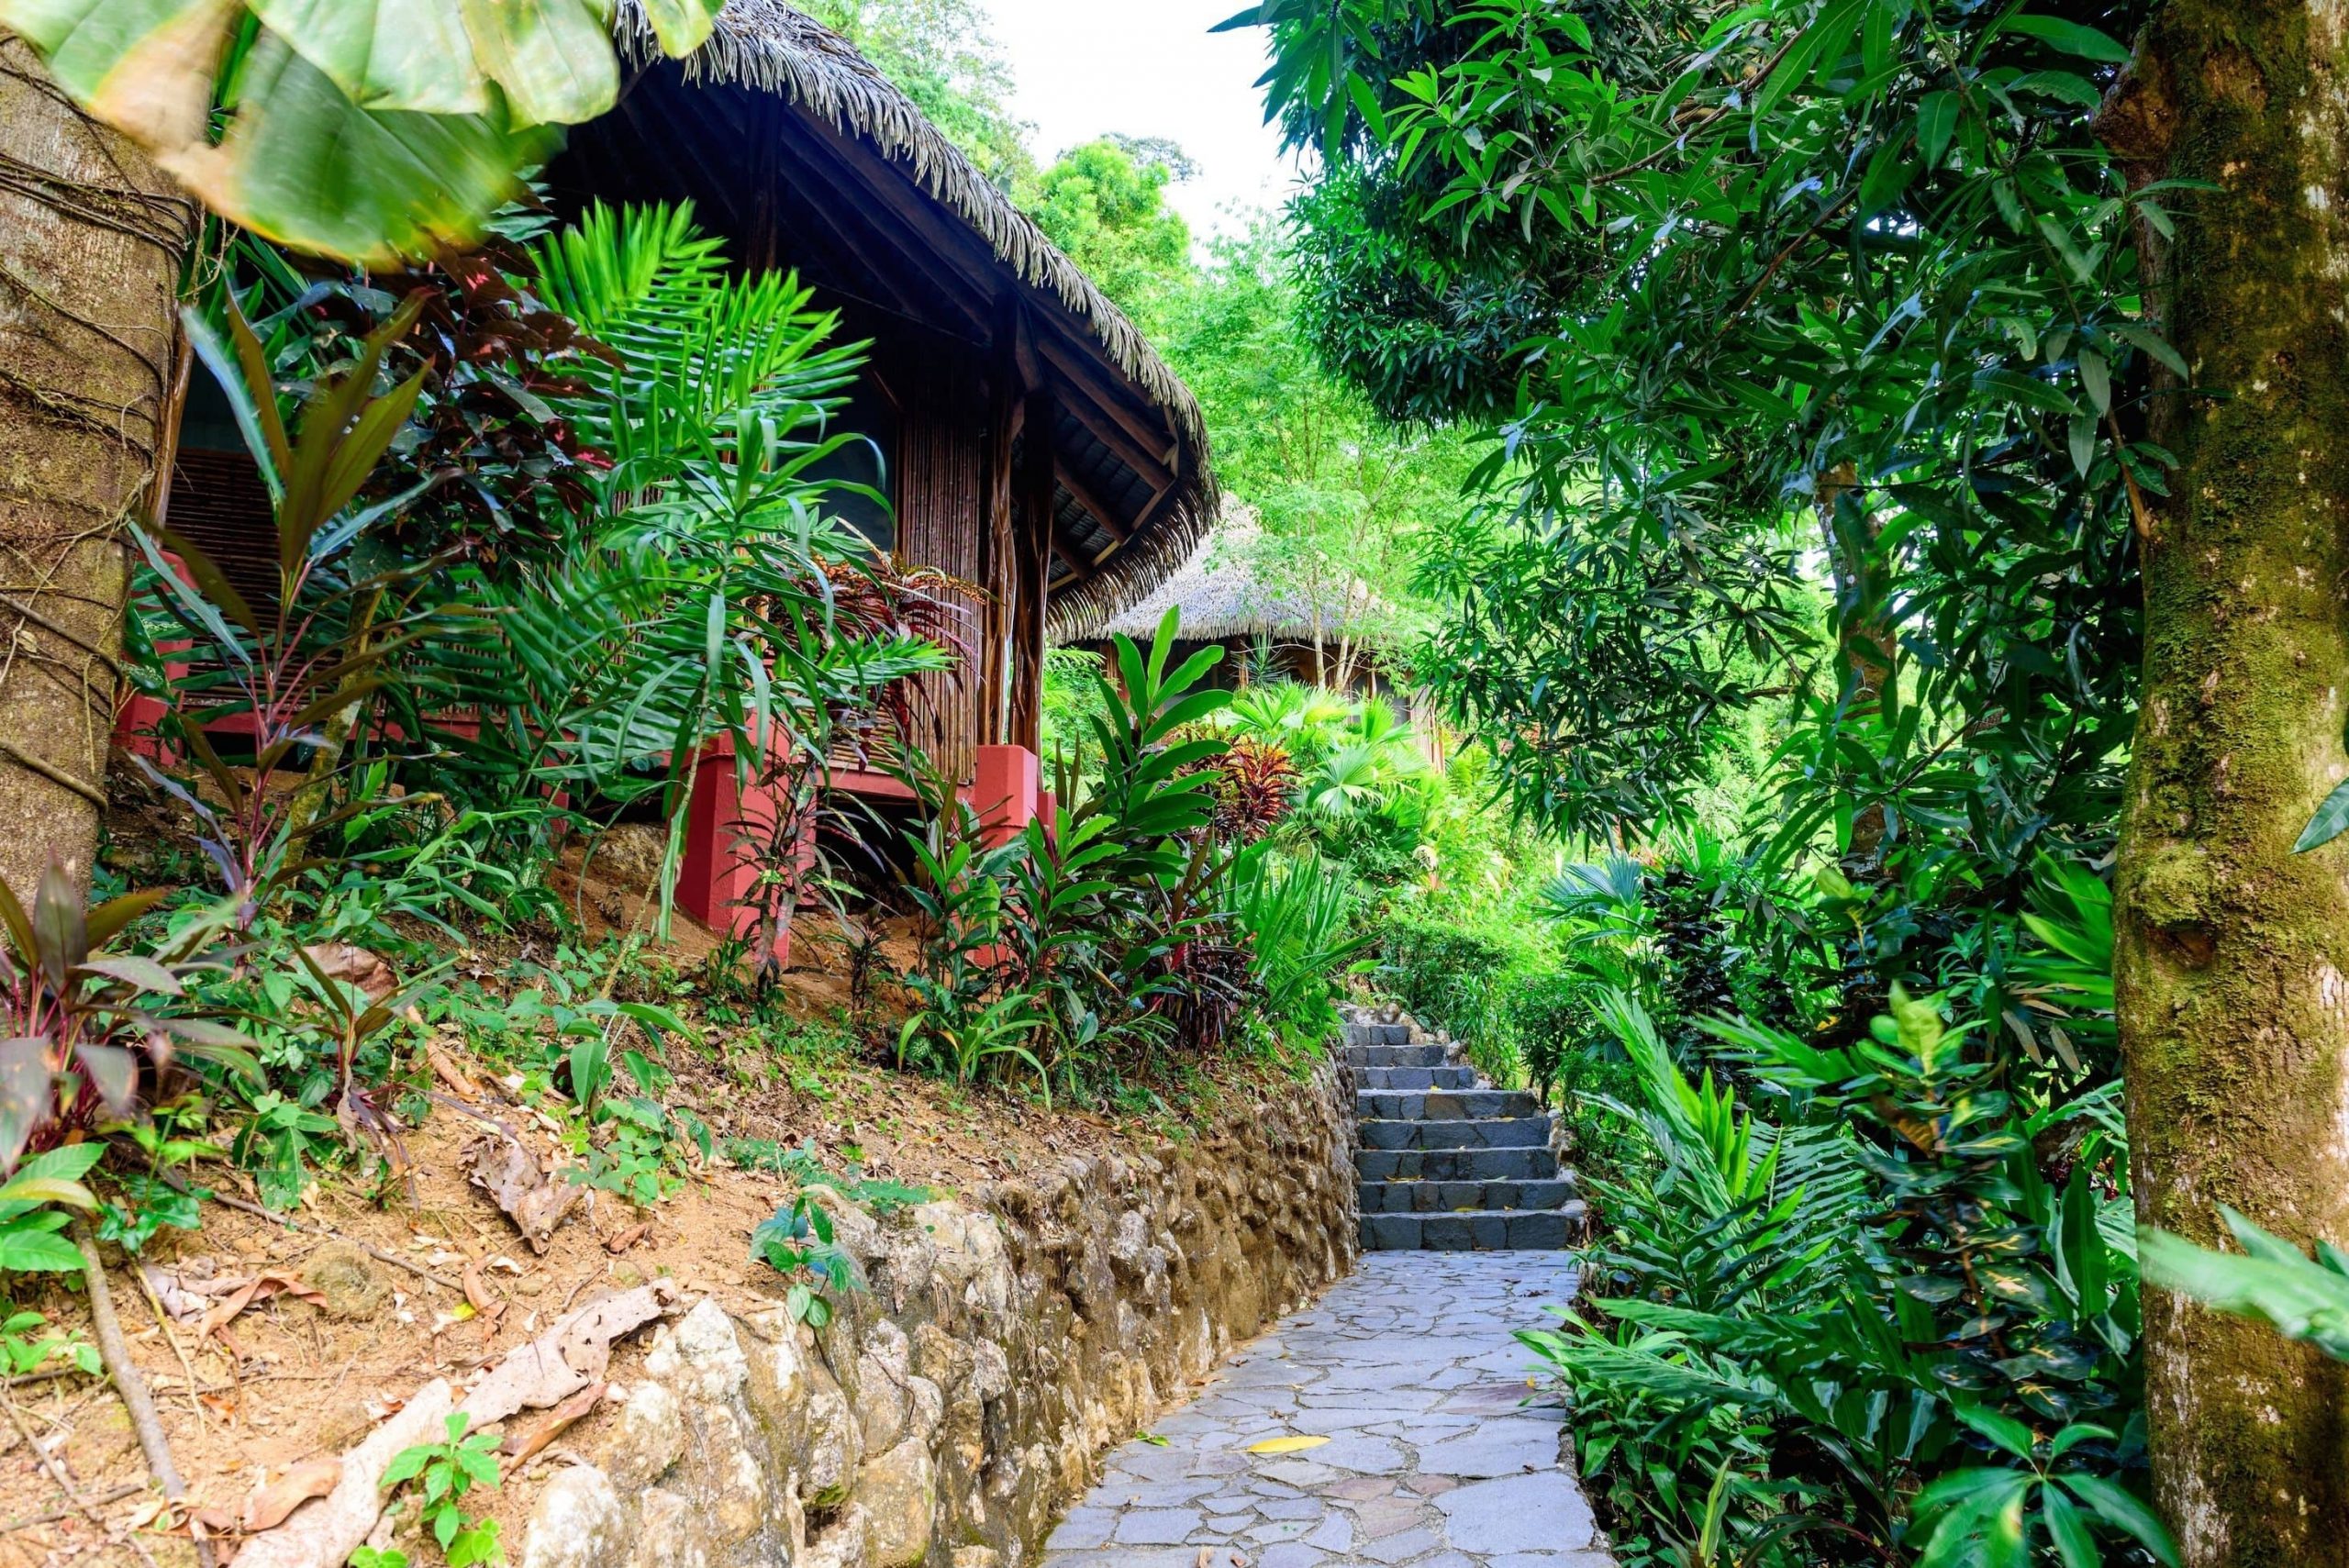 The walkways between villas at Luna Lodge in Costa Rica with thatch roofing, stone pathways, and lush jungle landscape surrounding the path.